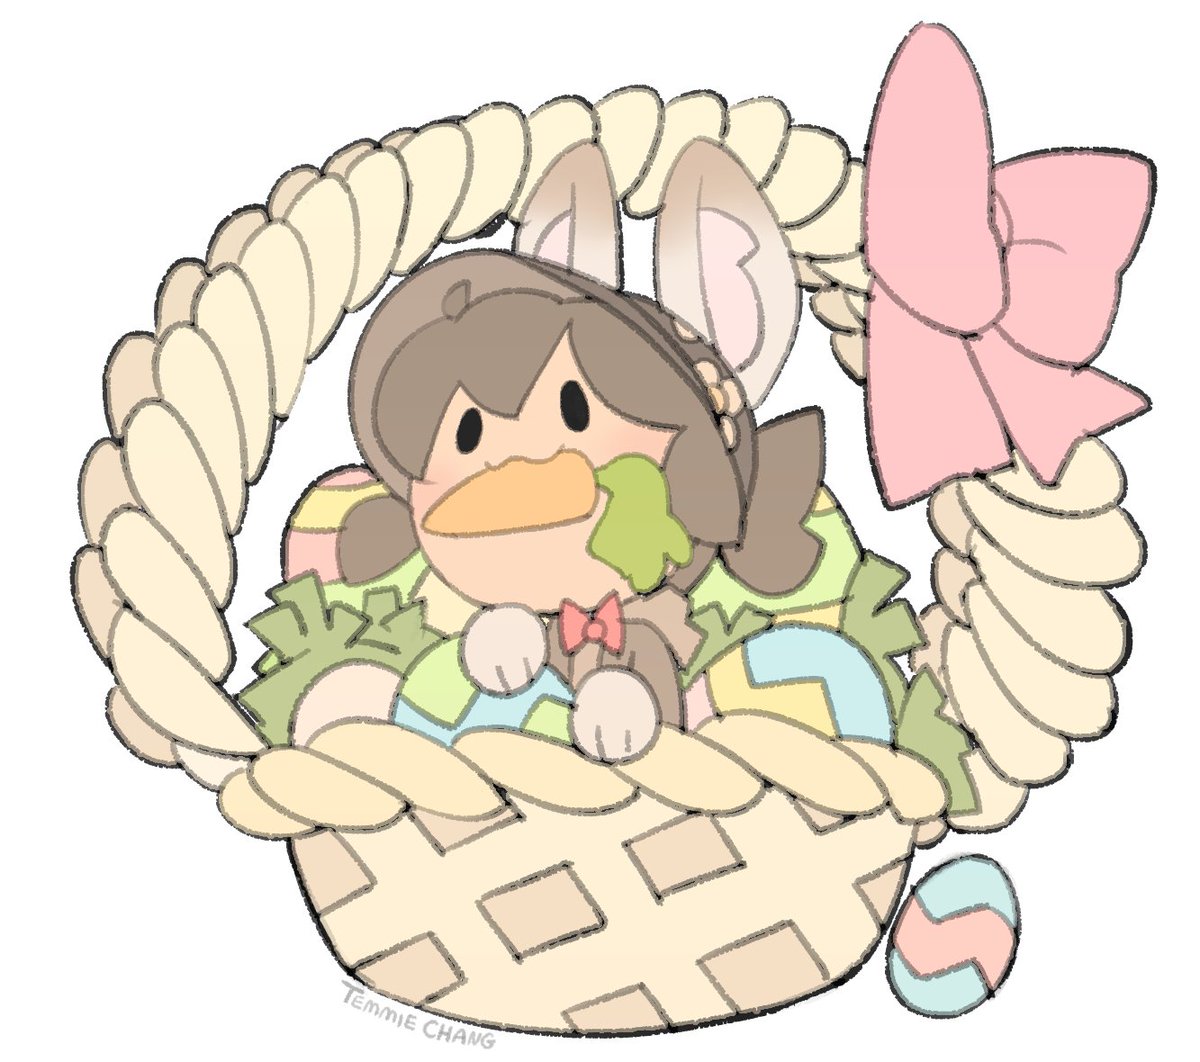 「happy easter!!!! 」|temmieのイラスト